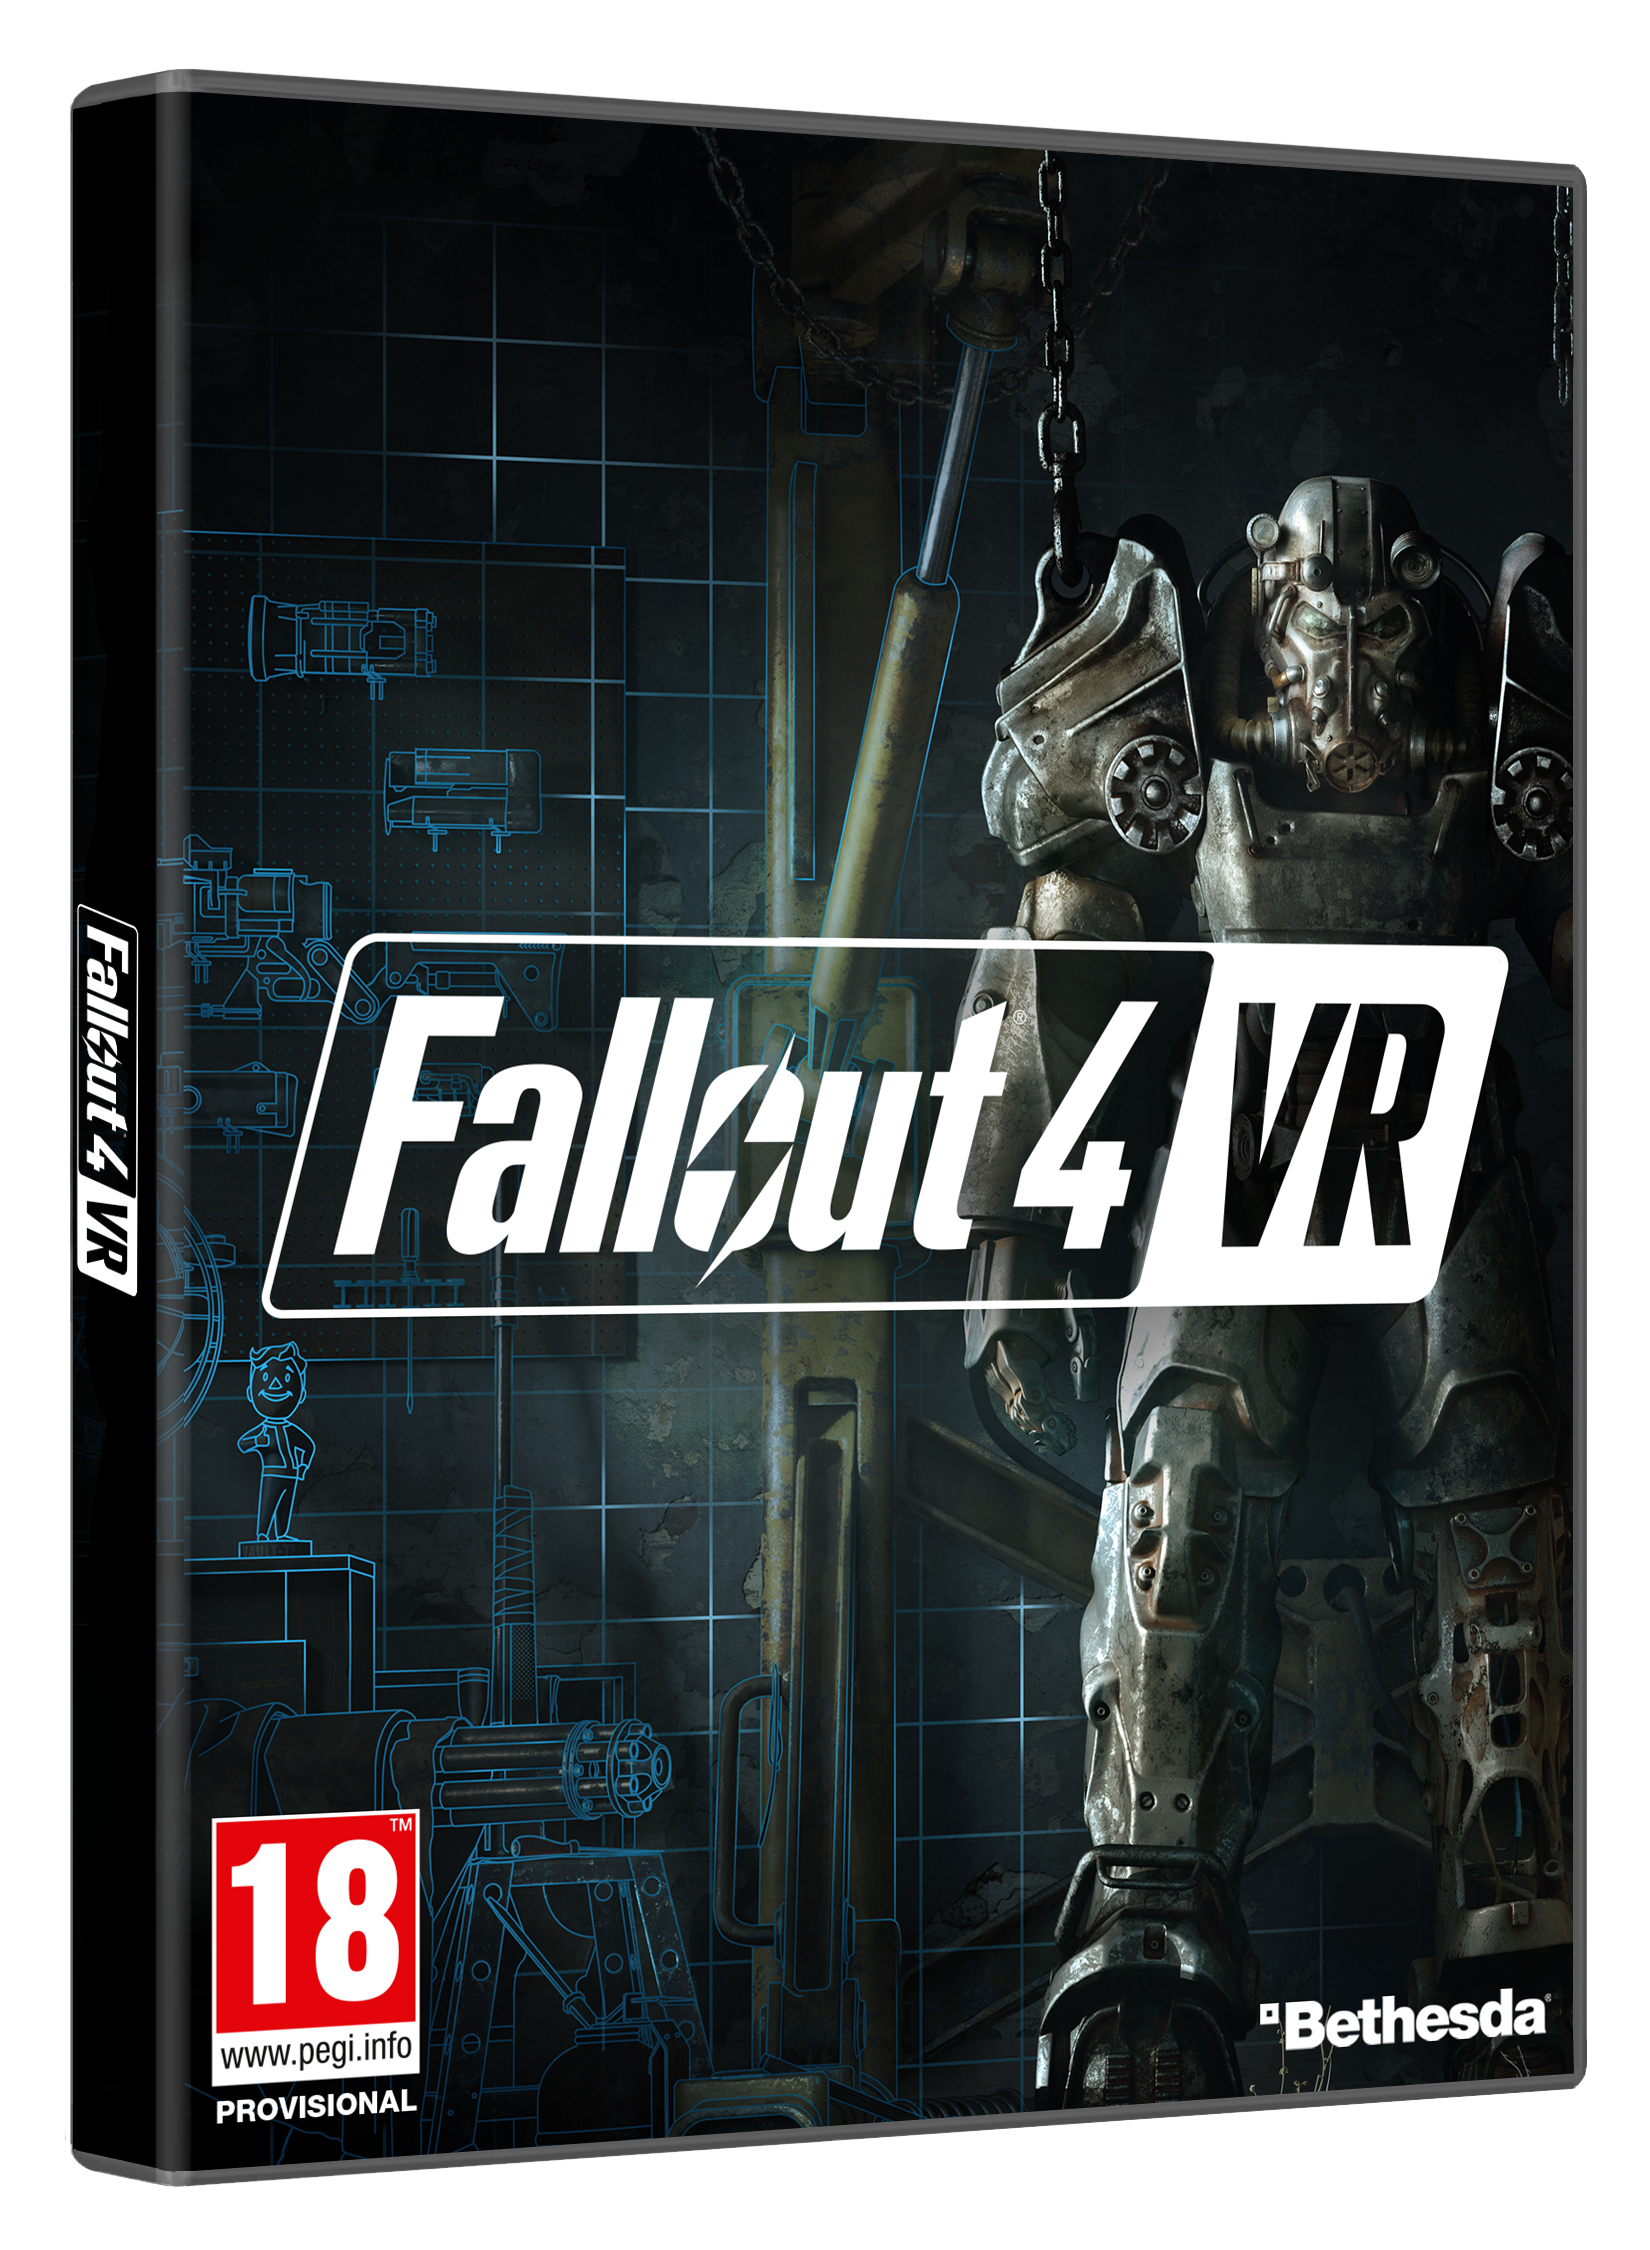 mods for fallout 4 vr